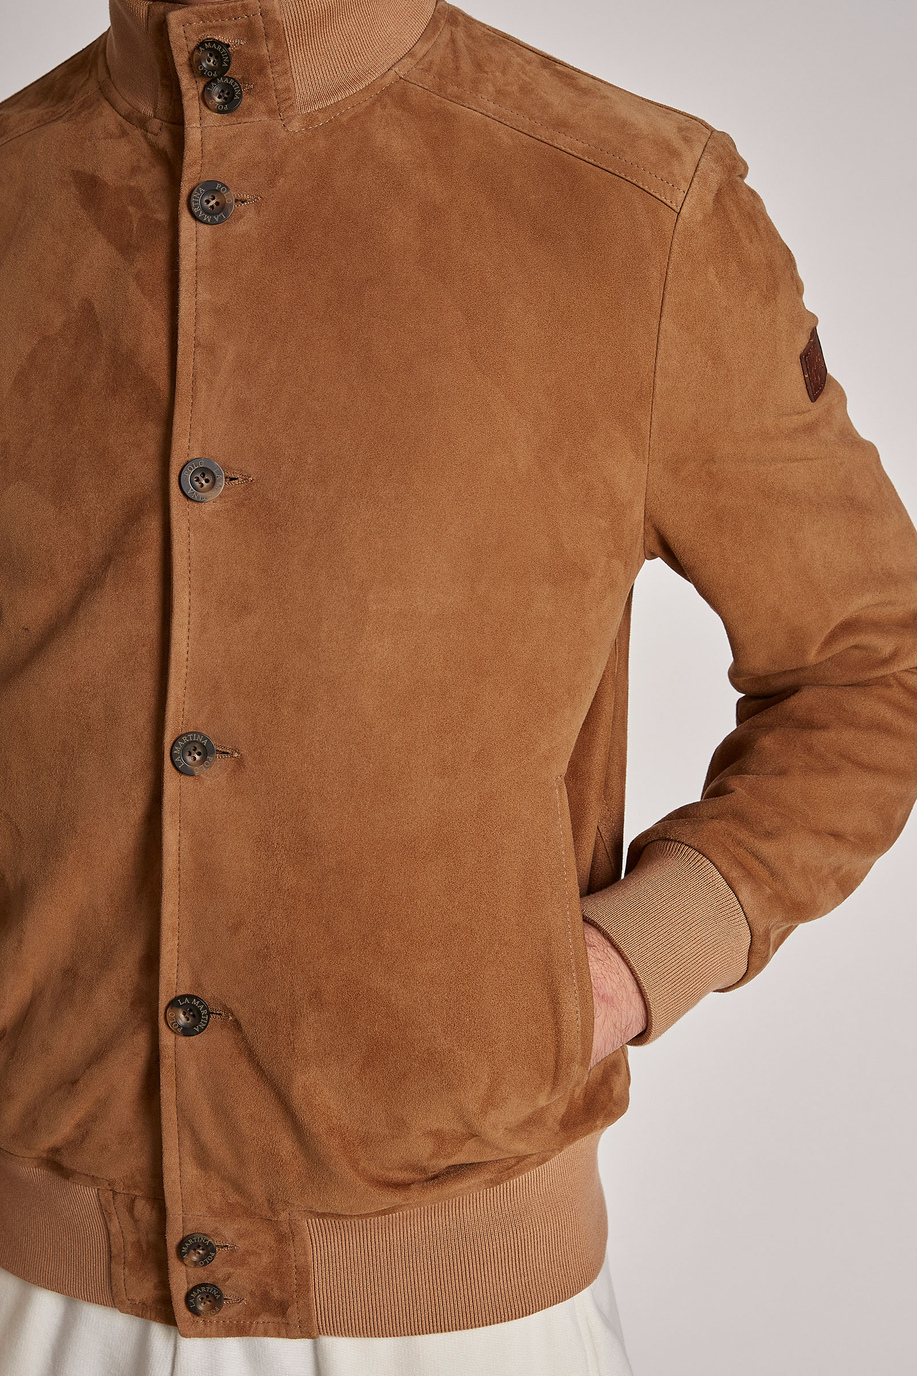 Men's button-up suede bomber jacket